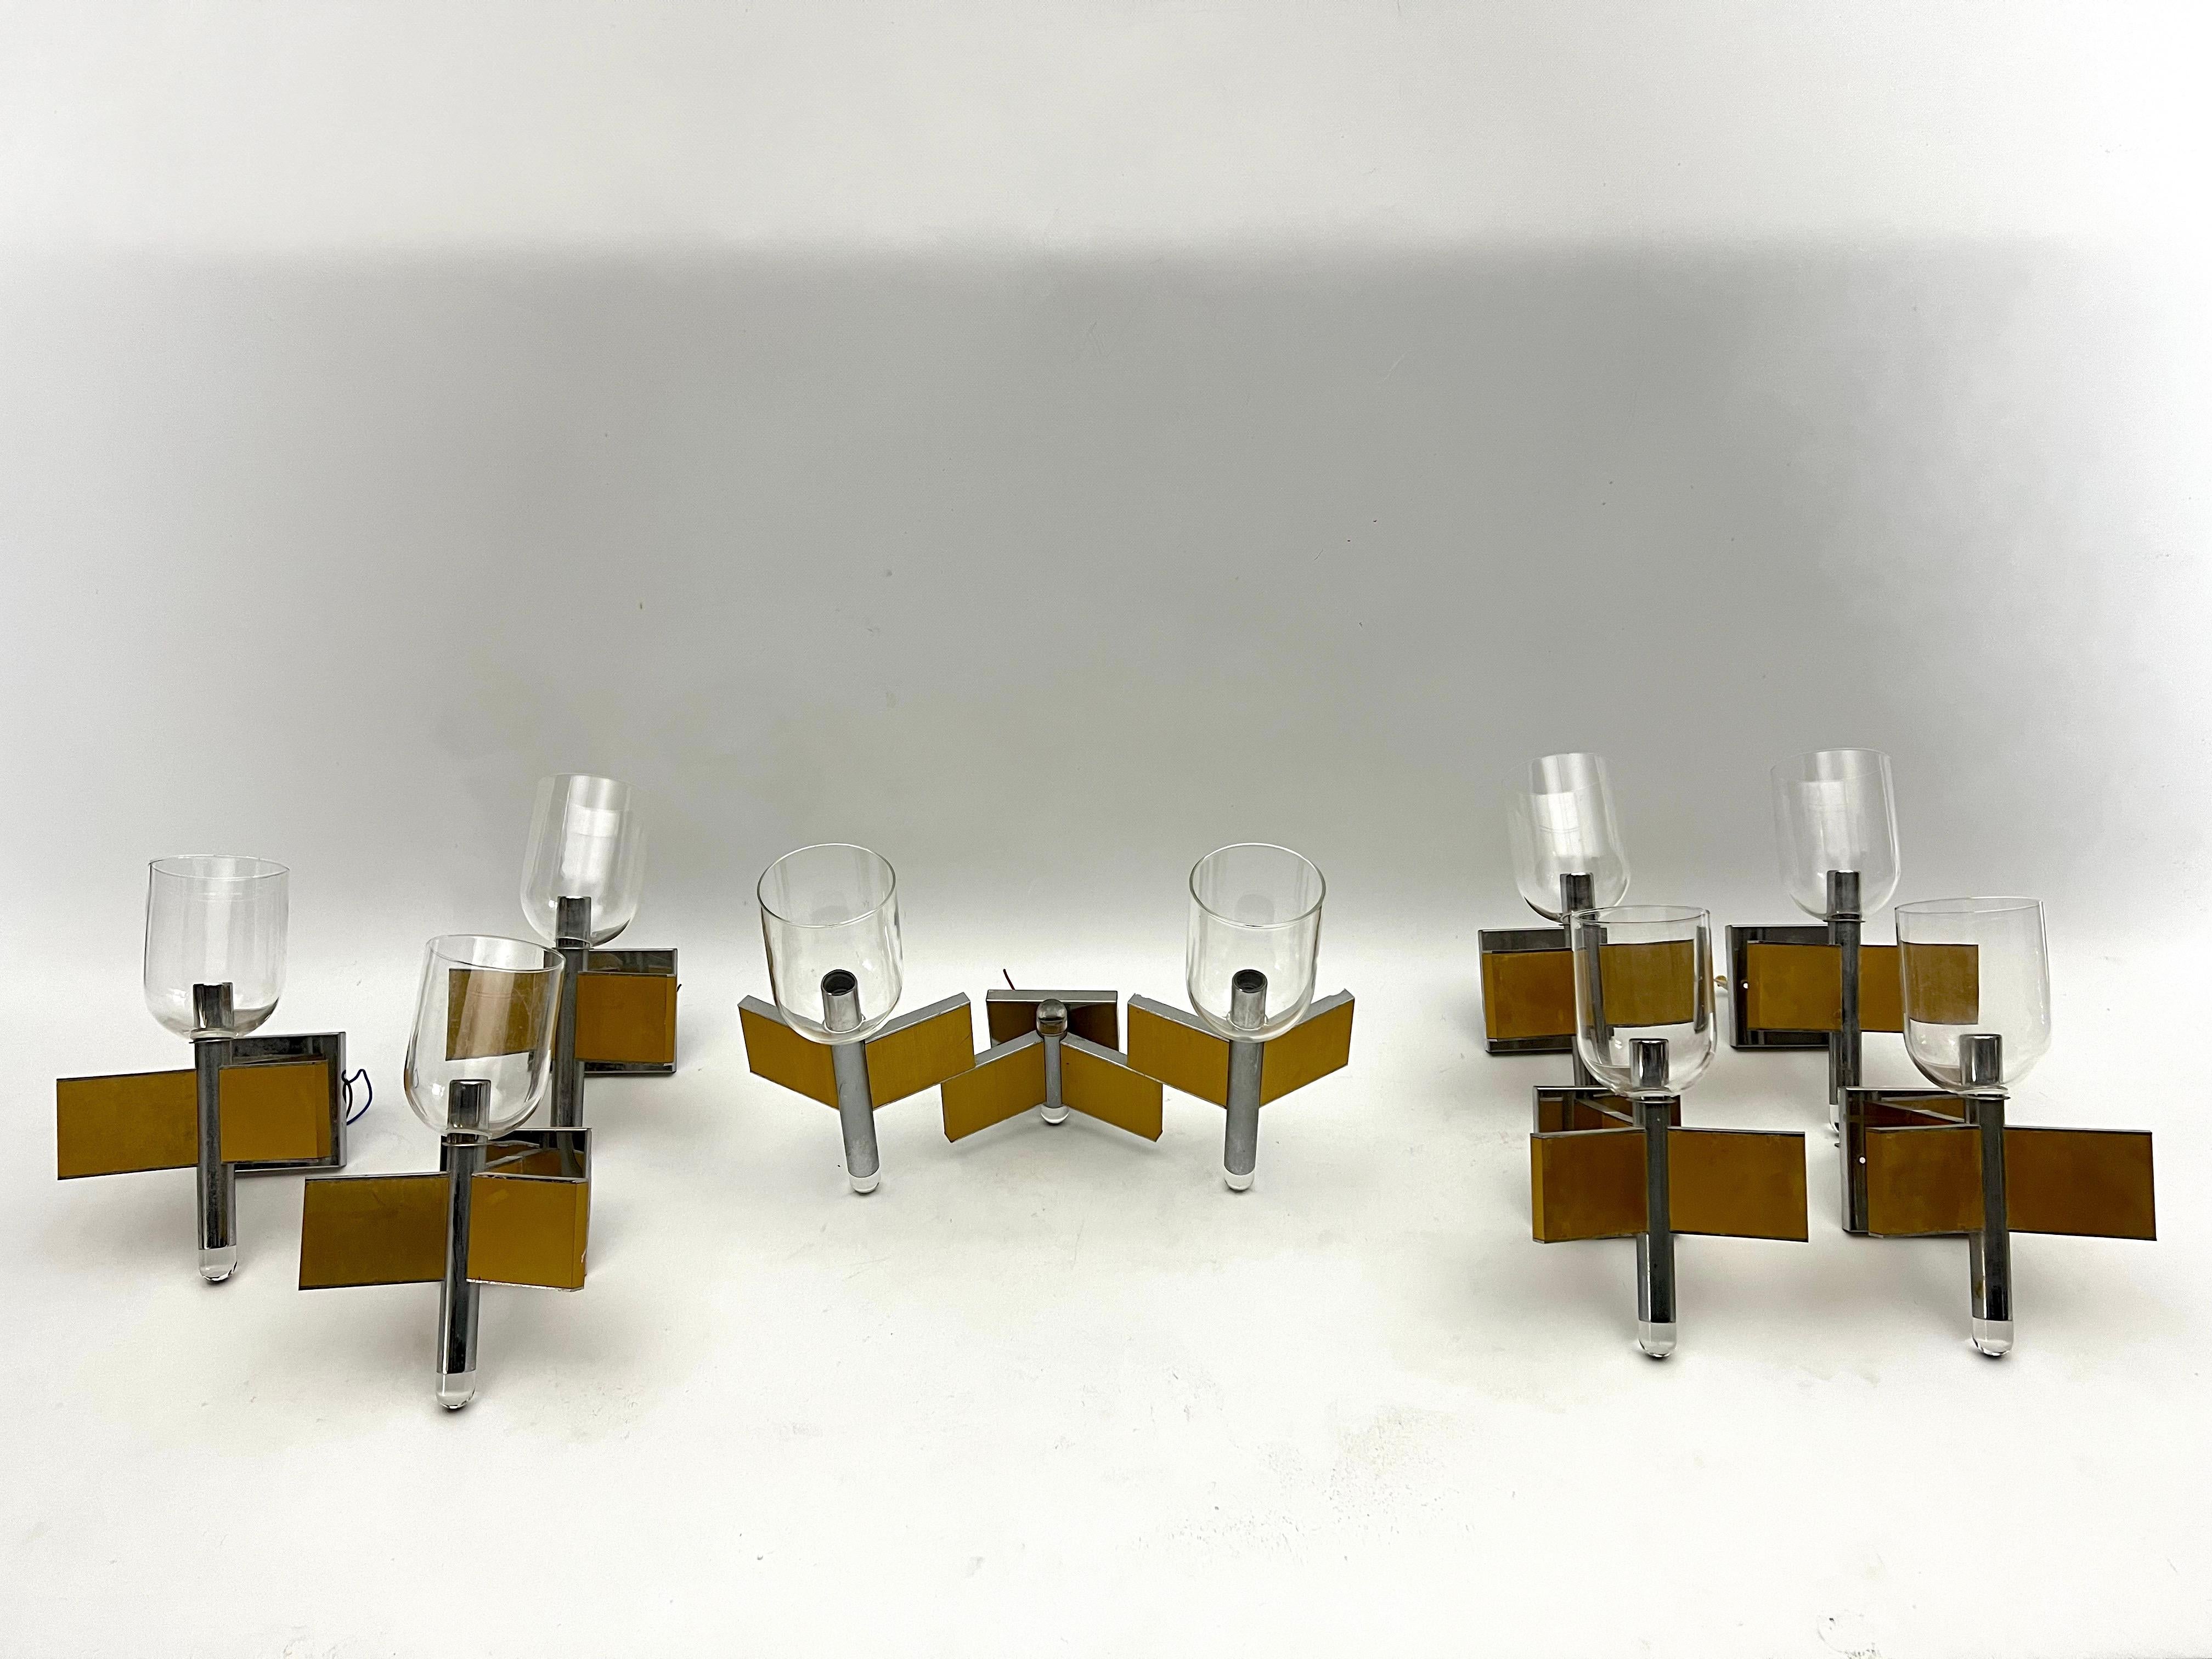 Set of eight sconces in brass, chrome and clear glass signed by Sciolari. The set is composed of one large sconce with double glasses and lights and seven sconces with single glass and light. Fair vintage condition with trace of age and use. No